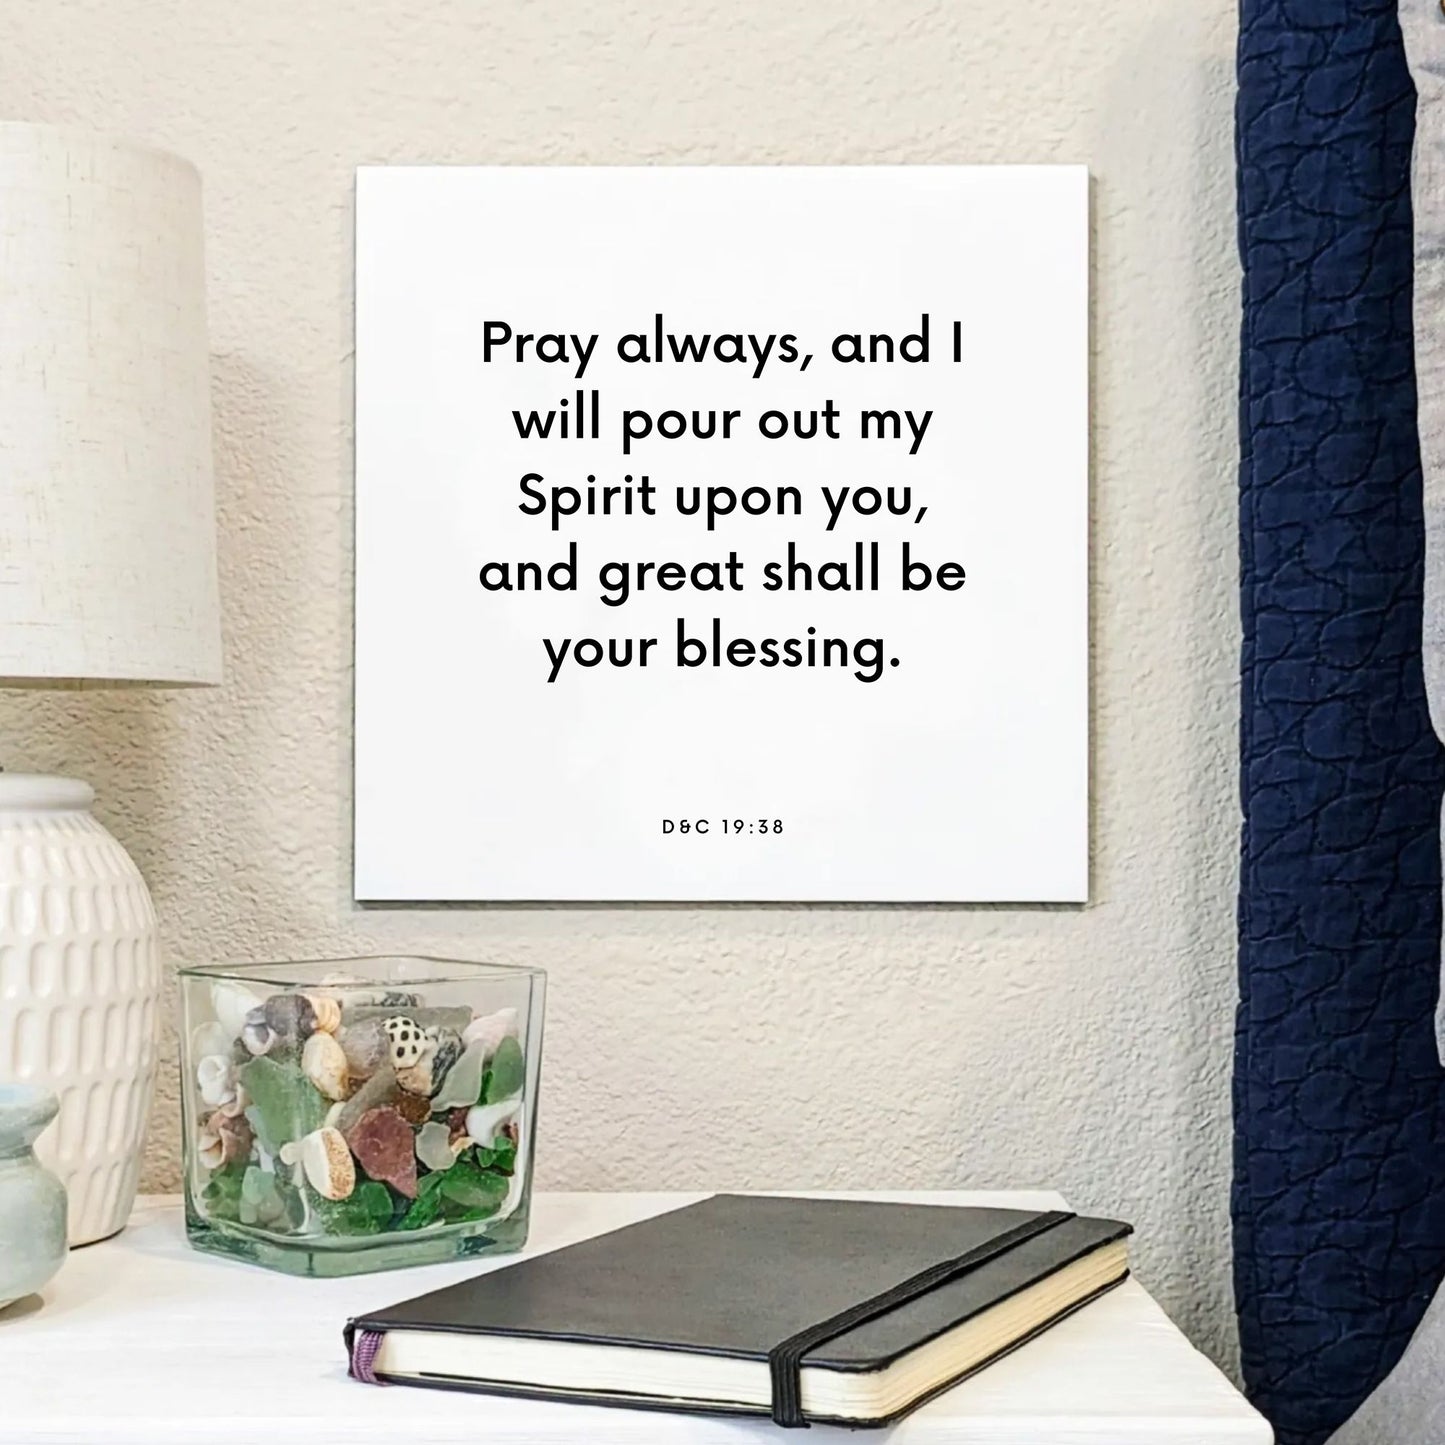 Bedside mouting of the scripture tile for D&C 19:38 - "Pray always, and I will pour out my Spirit upon you"